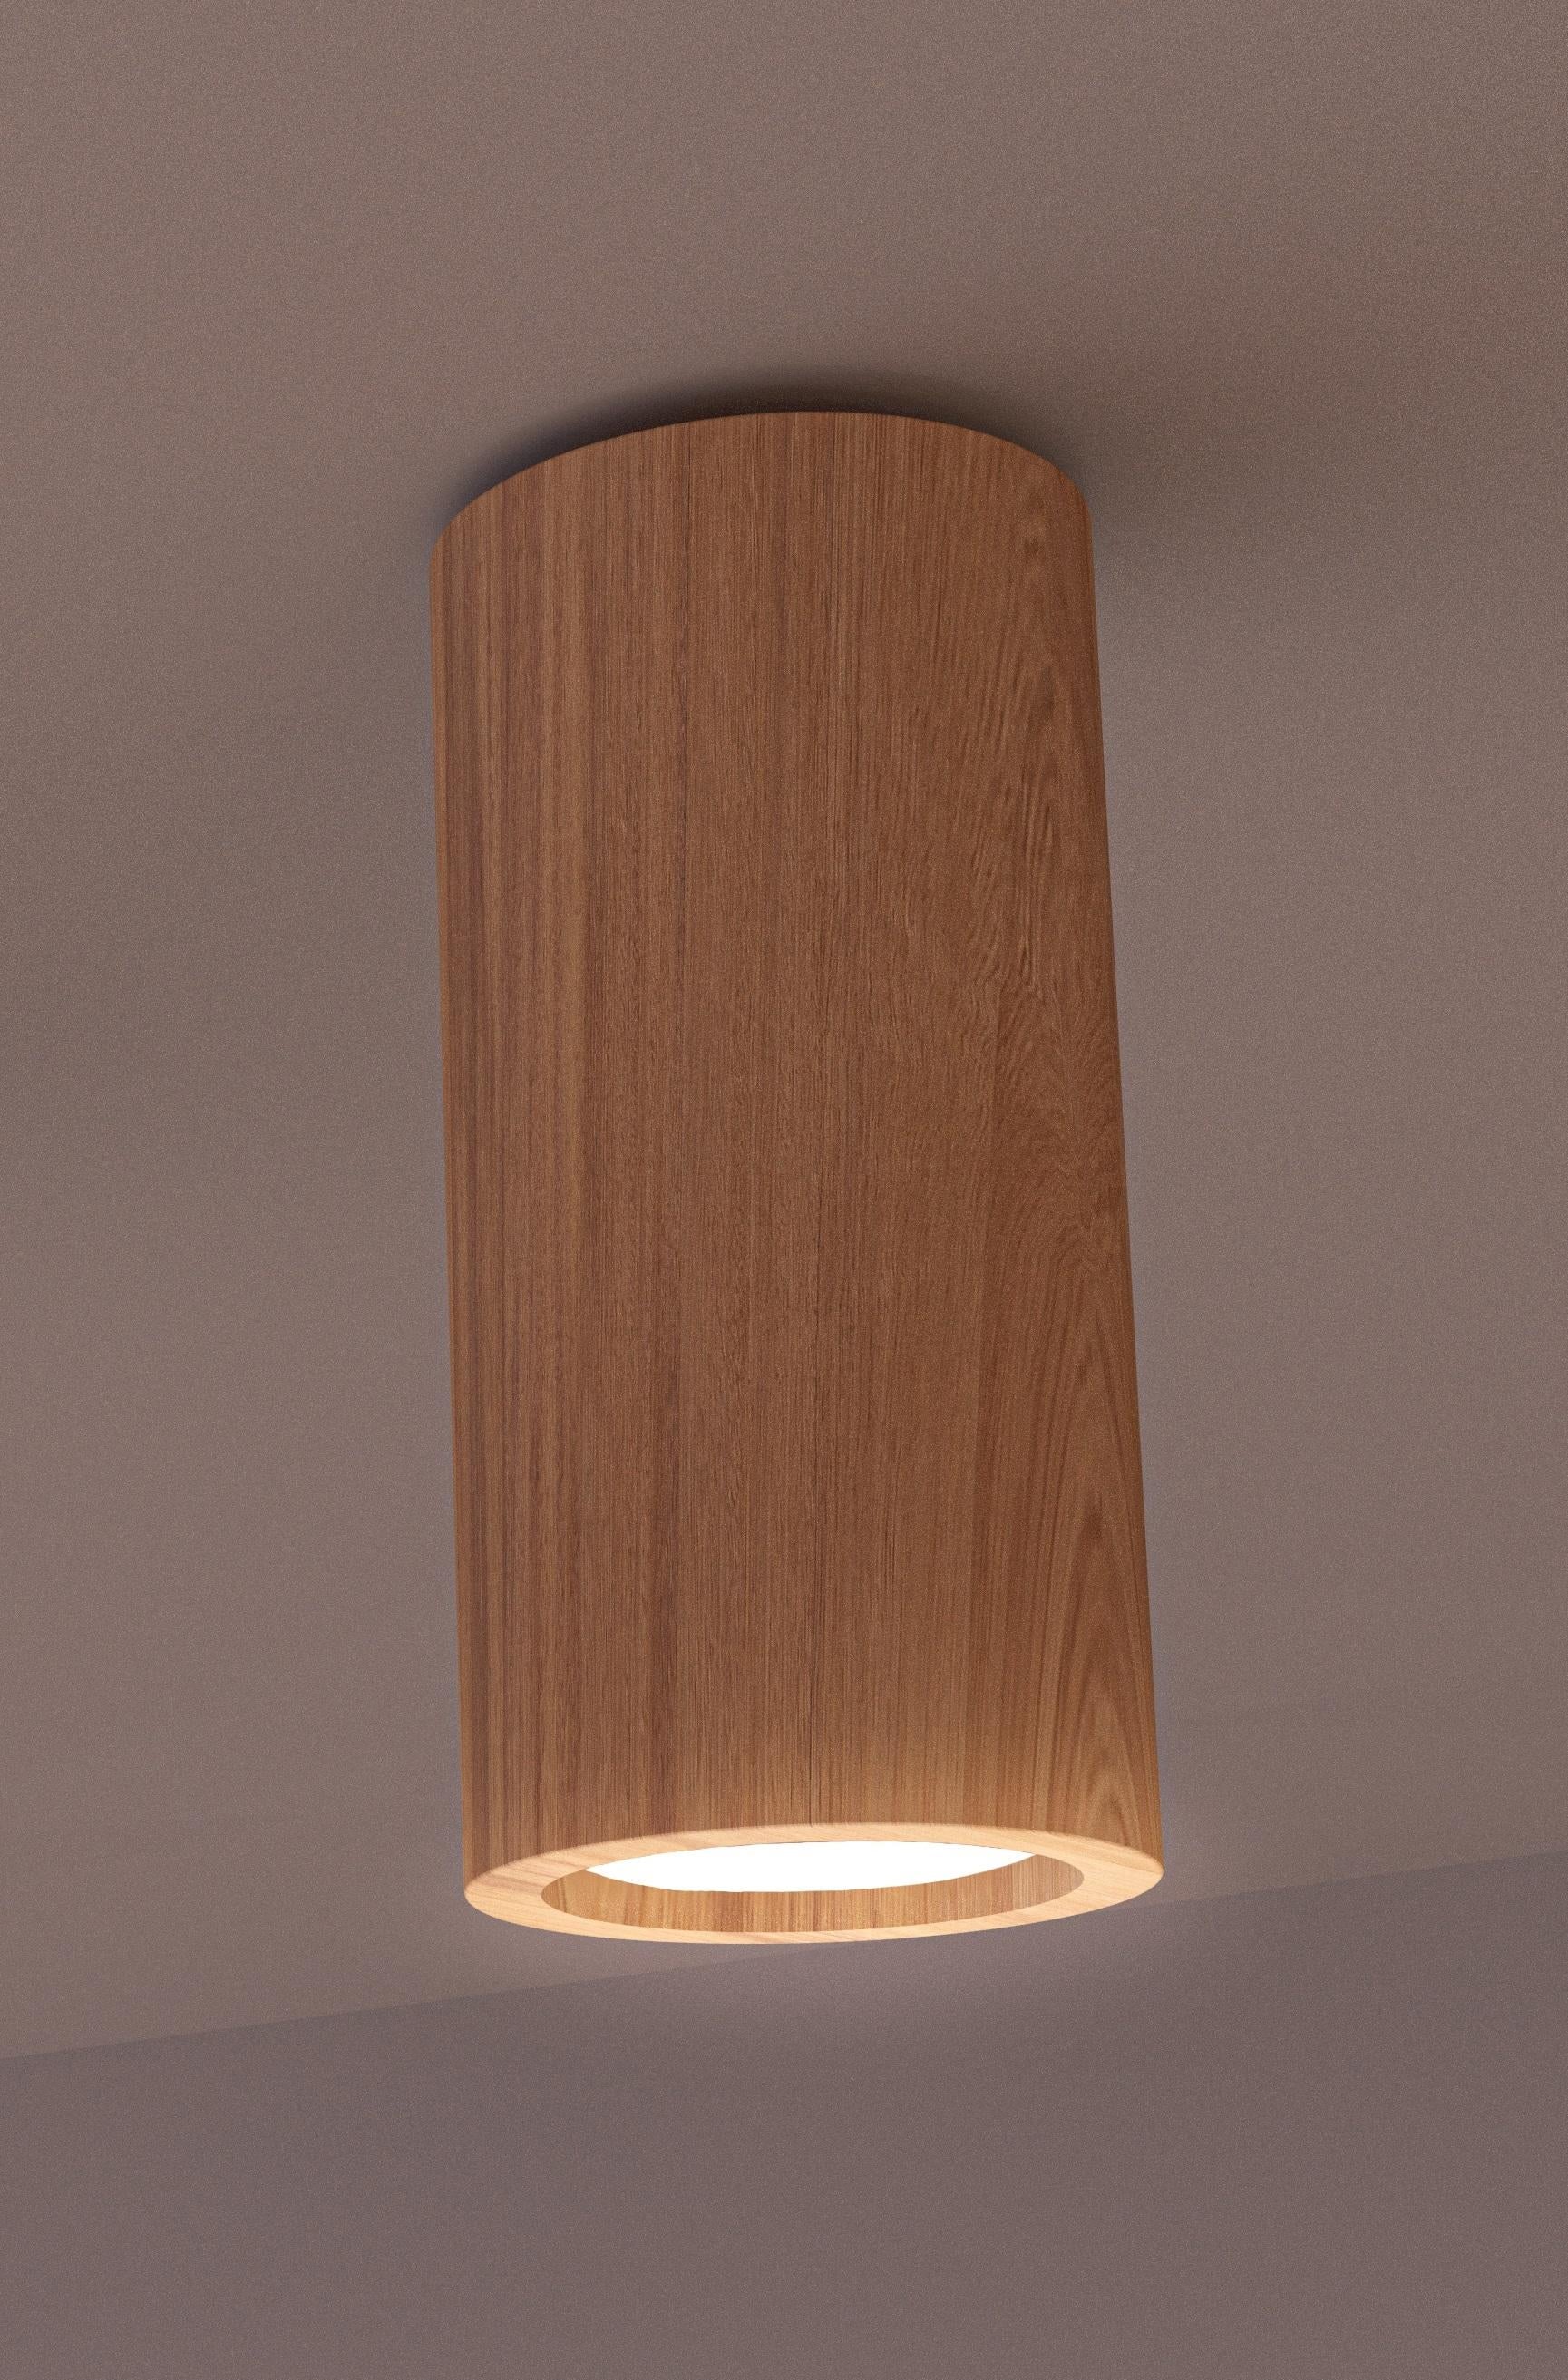 Henka Iroko Wood Spotlight by Alabastro Italiano
Dimensions: Ø 7,2 x H 15 cm.
Materials: Iroko wood.

Available in white alabaster and iroko wood. Please contact us.

All our lamps can be wired according to each country. If sold to the USA it will